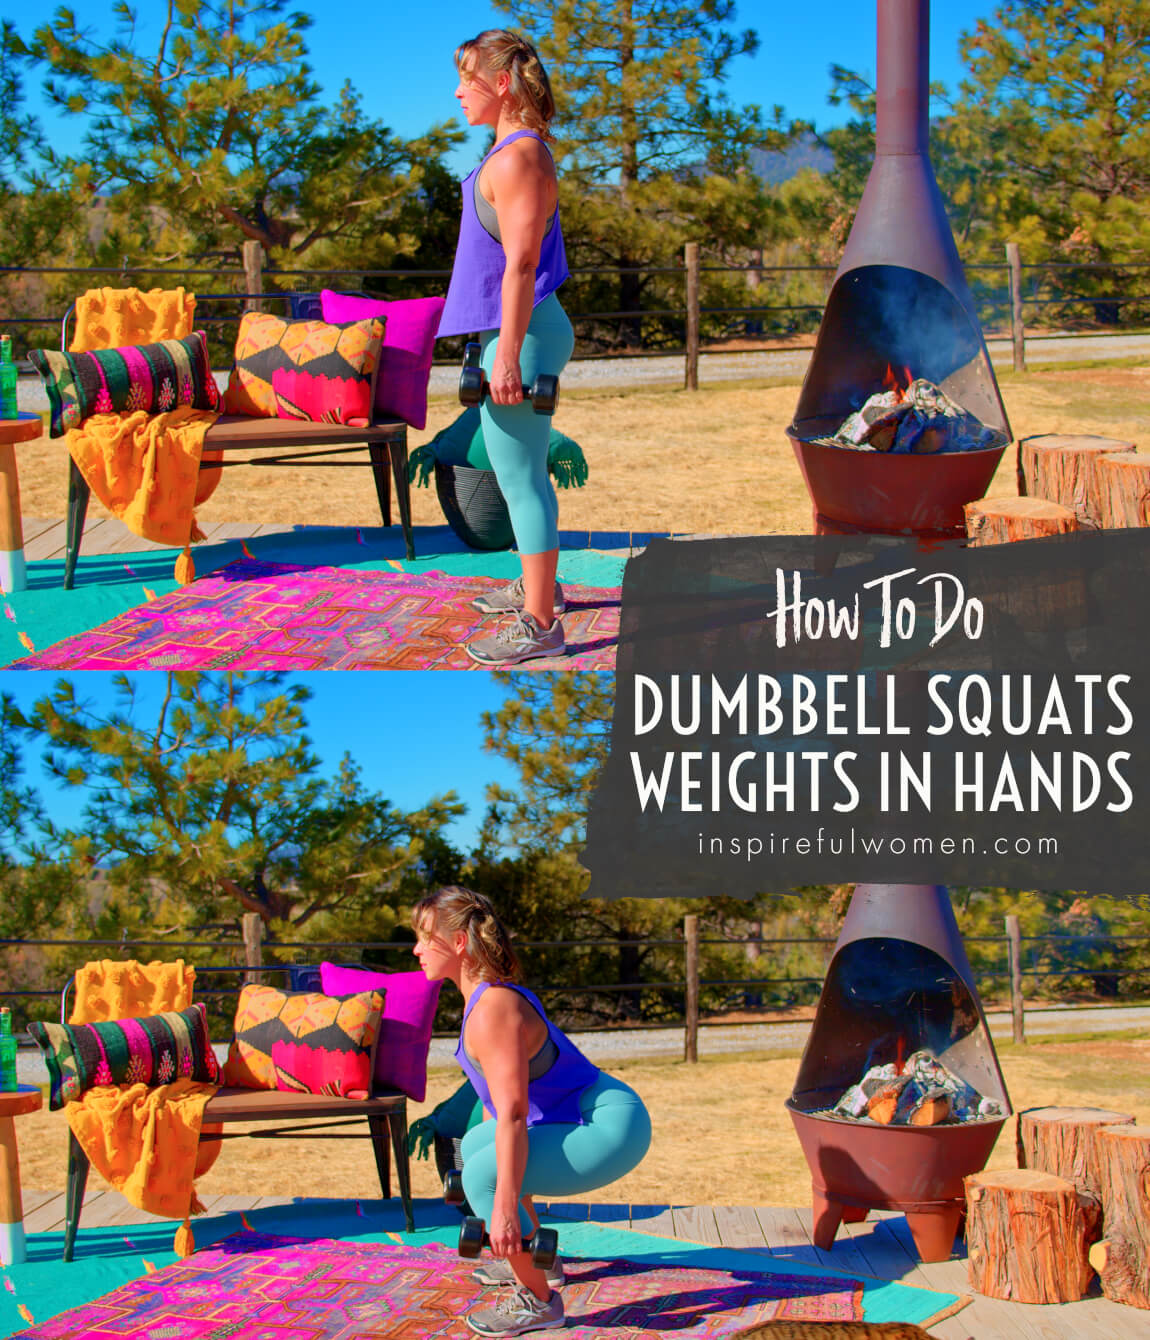 how-to-resisted-squats-dumbbells-in-hands-quads-glutes-exercise-proper-form